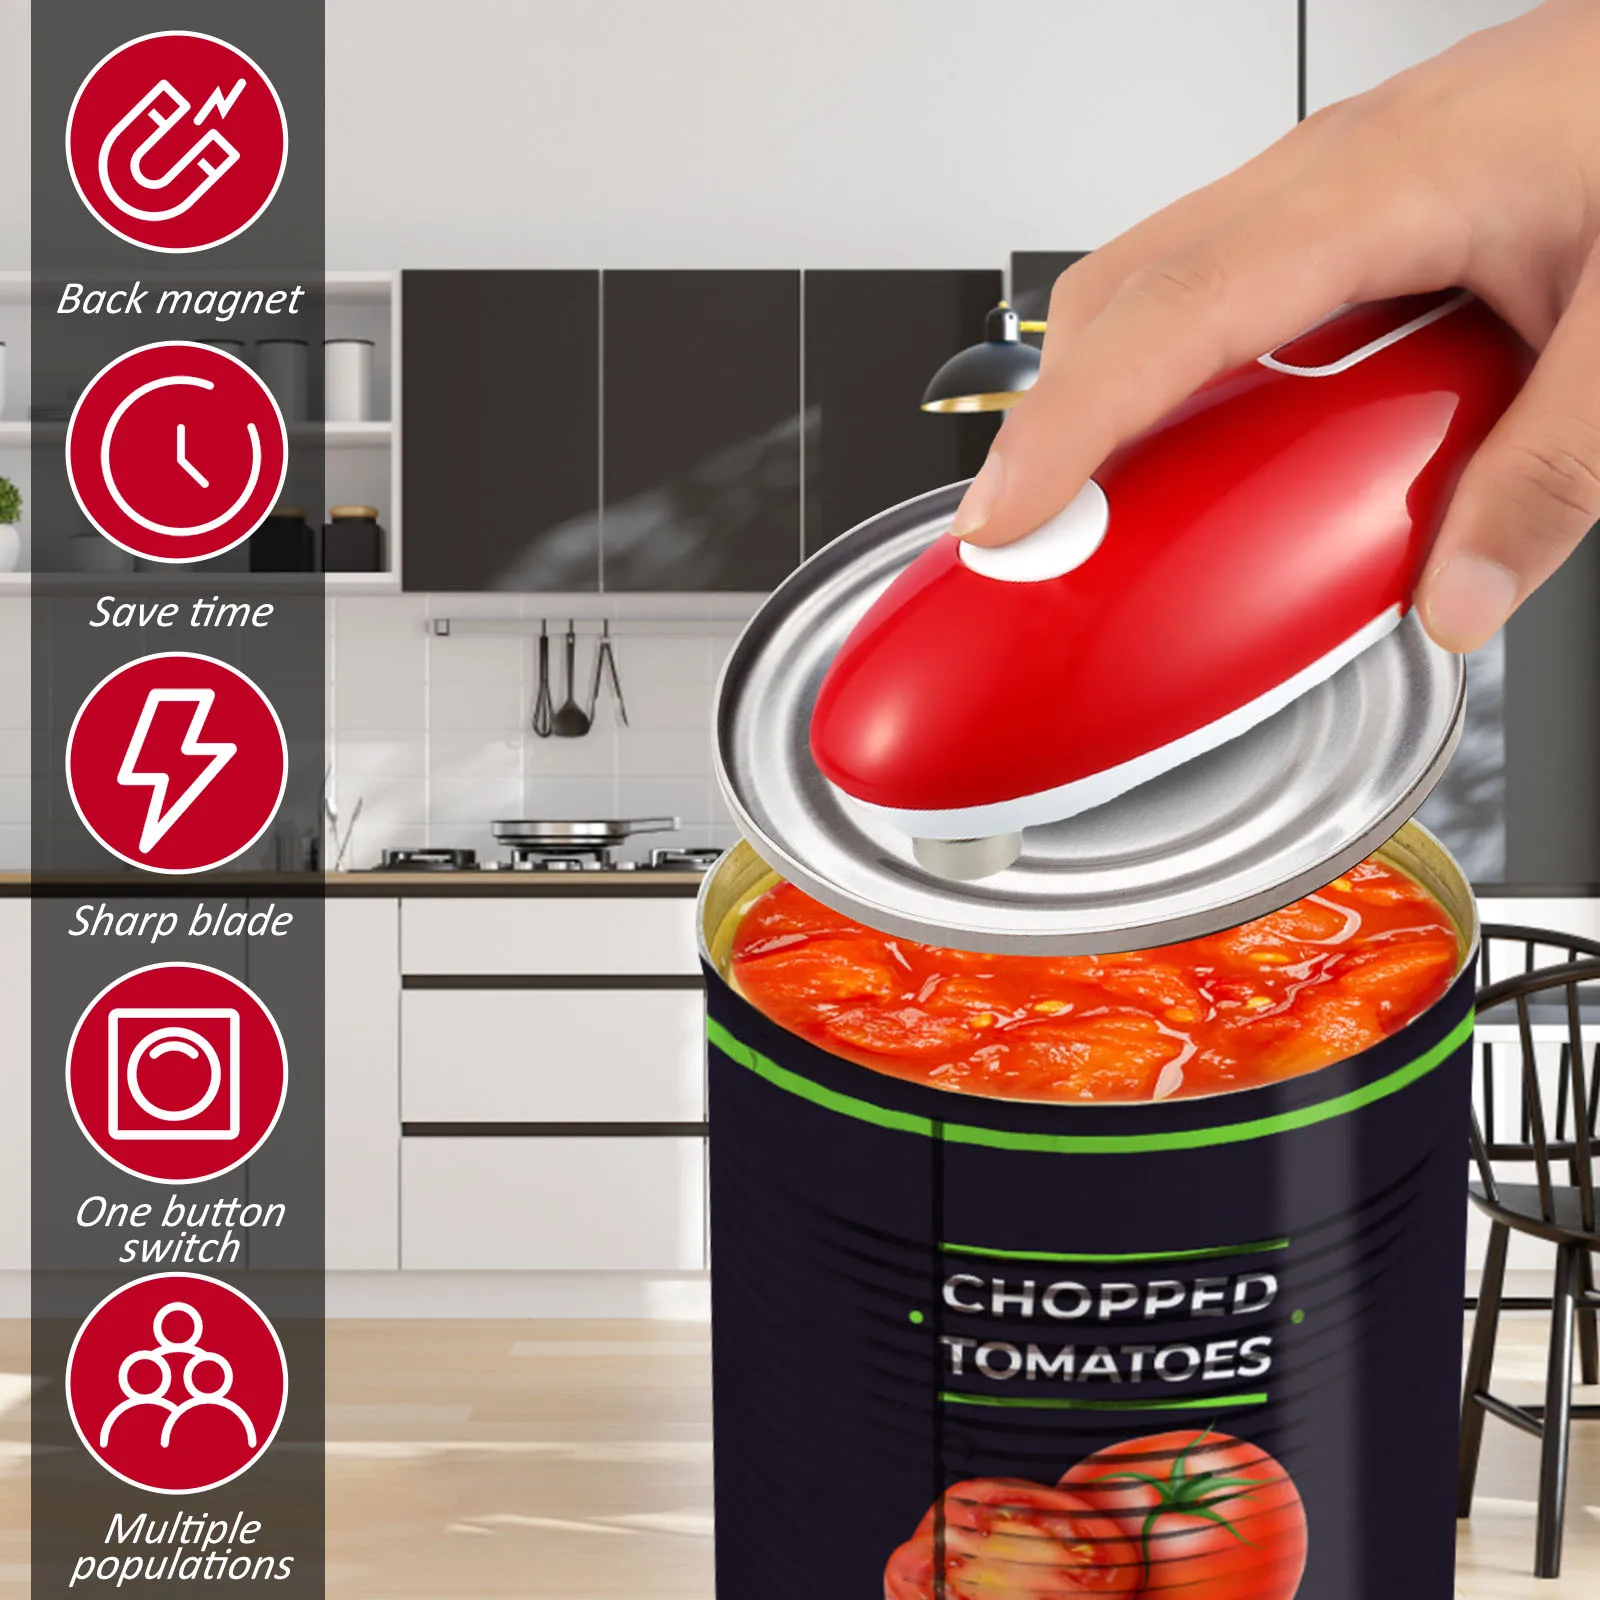 https://ae01.alicdn.com/kf/S68f3406196d543b3afeaef350c952684R/Electric-Tin-Opener-Portable-Can-Automatic-Bottle-Opener-Smooth-Edge-Handheld-Electric-Can-Opener-Household-Automatic.jpg